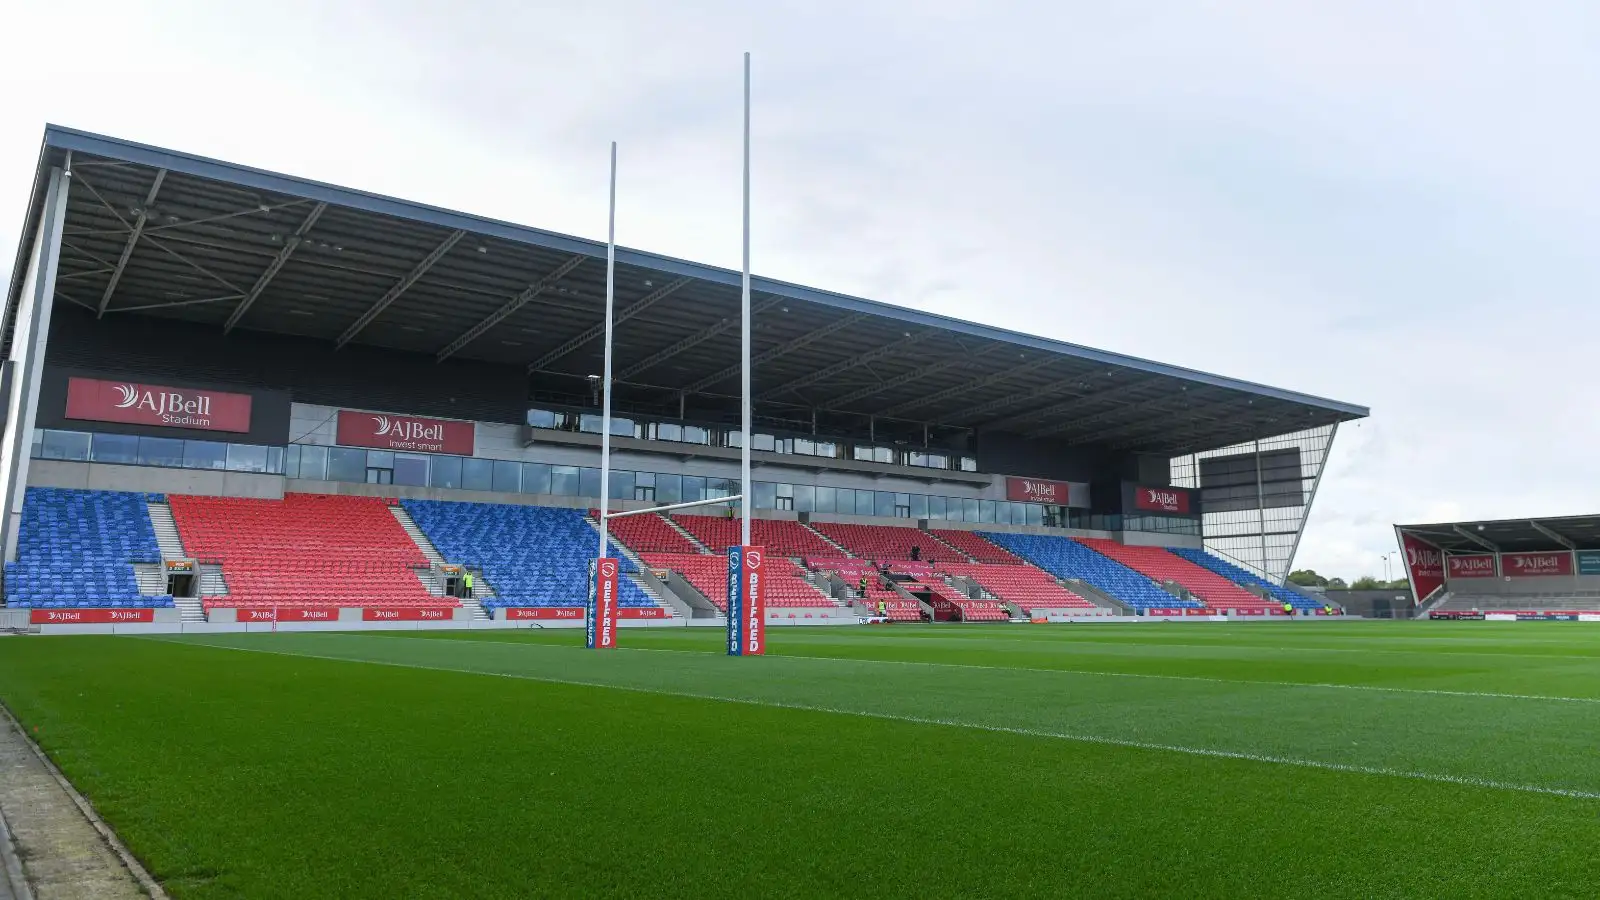 Spain coach takes on new role at Salford Red Devils: ‘An opportunity I could not turn down’